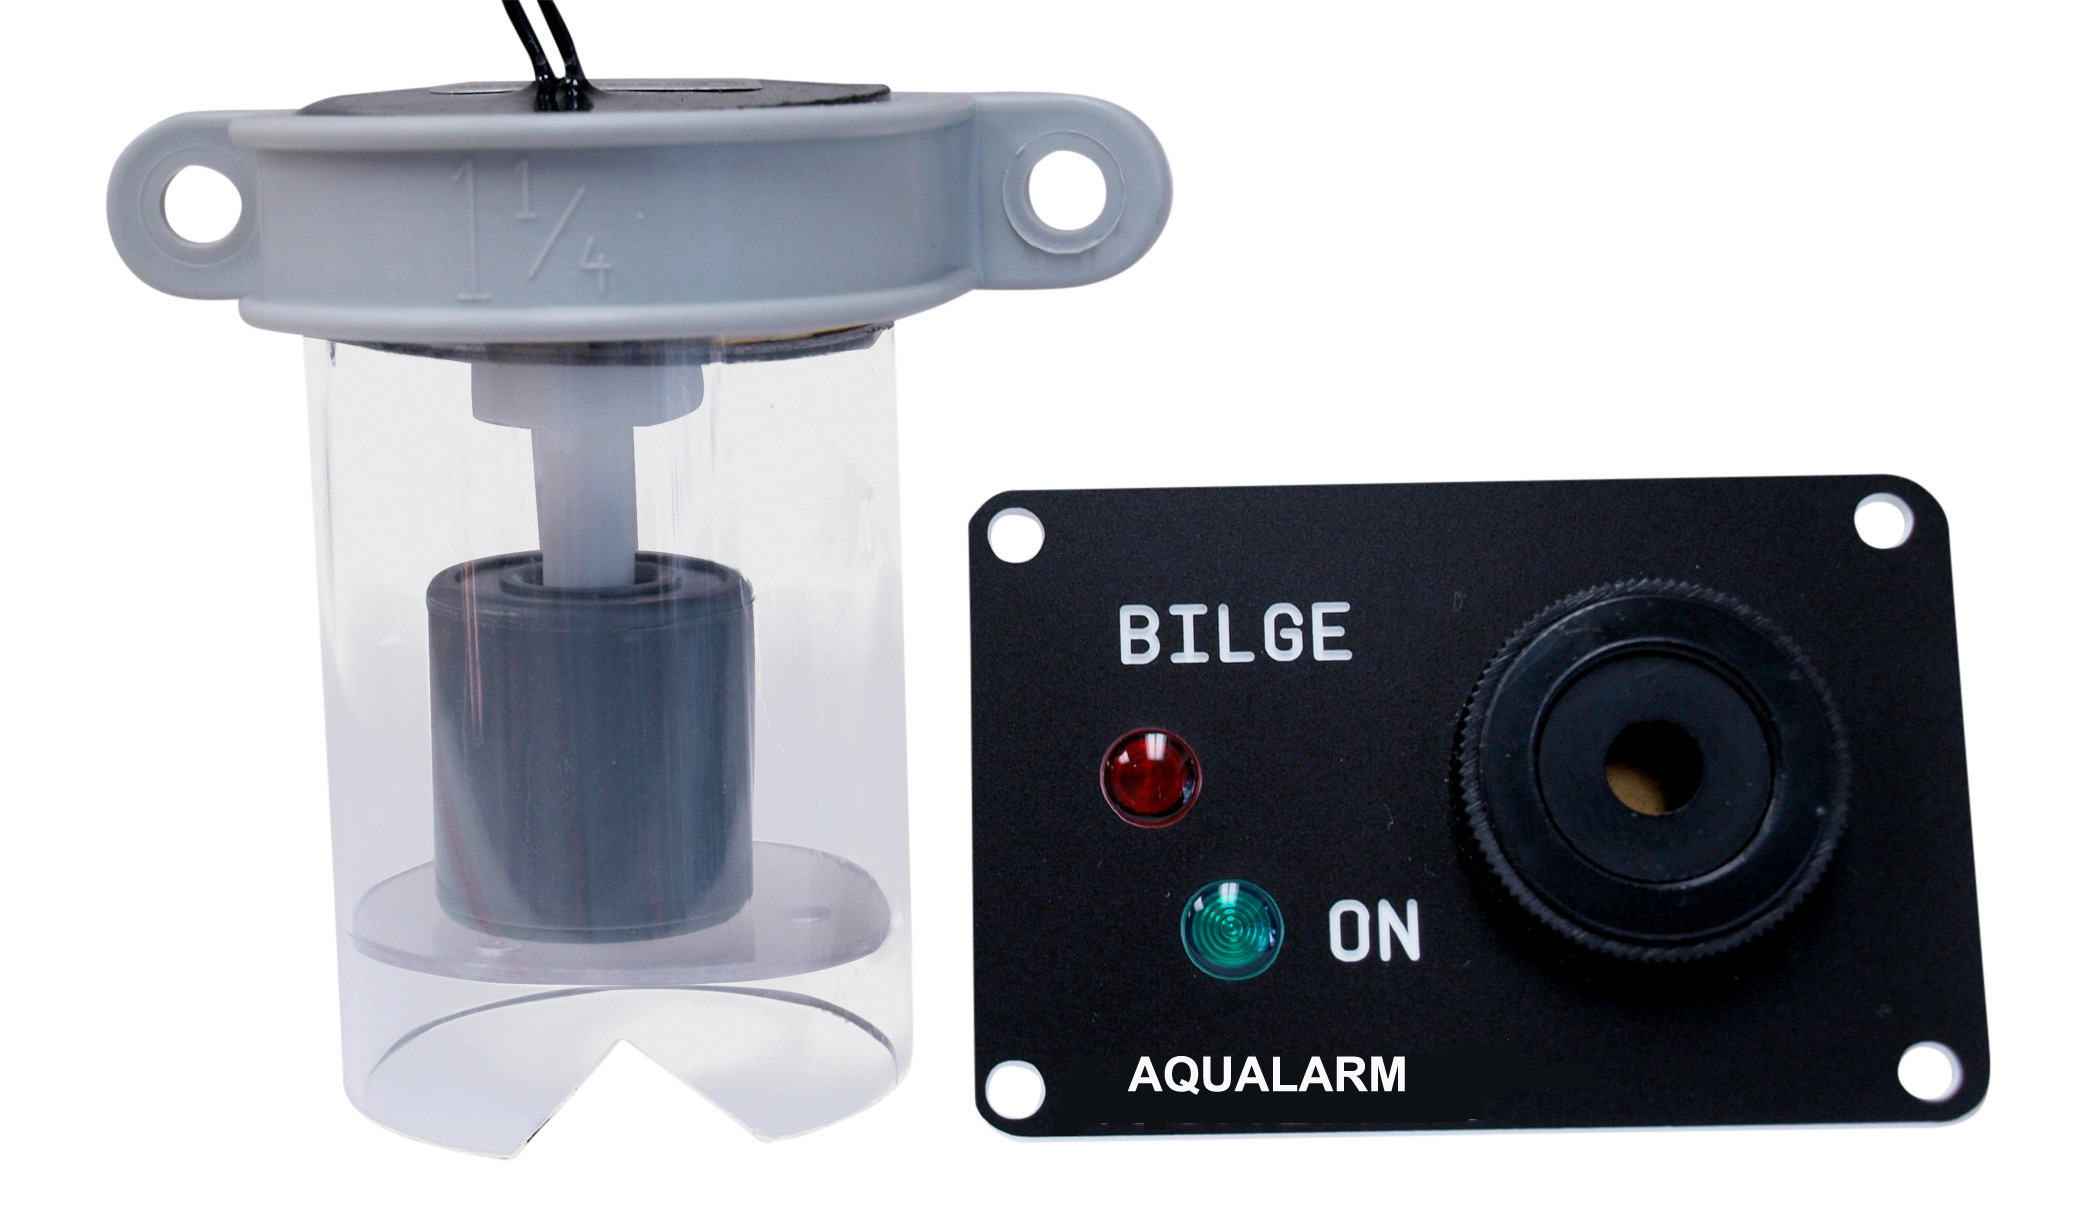 20240 Bilge High Water Warning with Detector - Click Image to Close